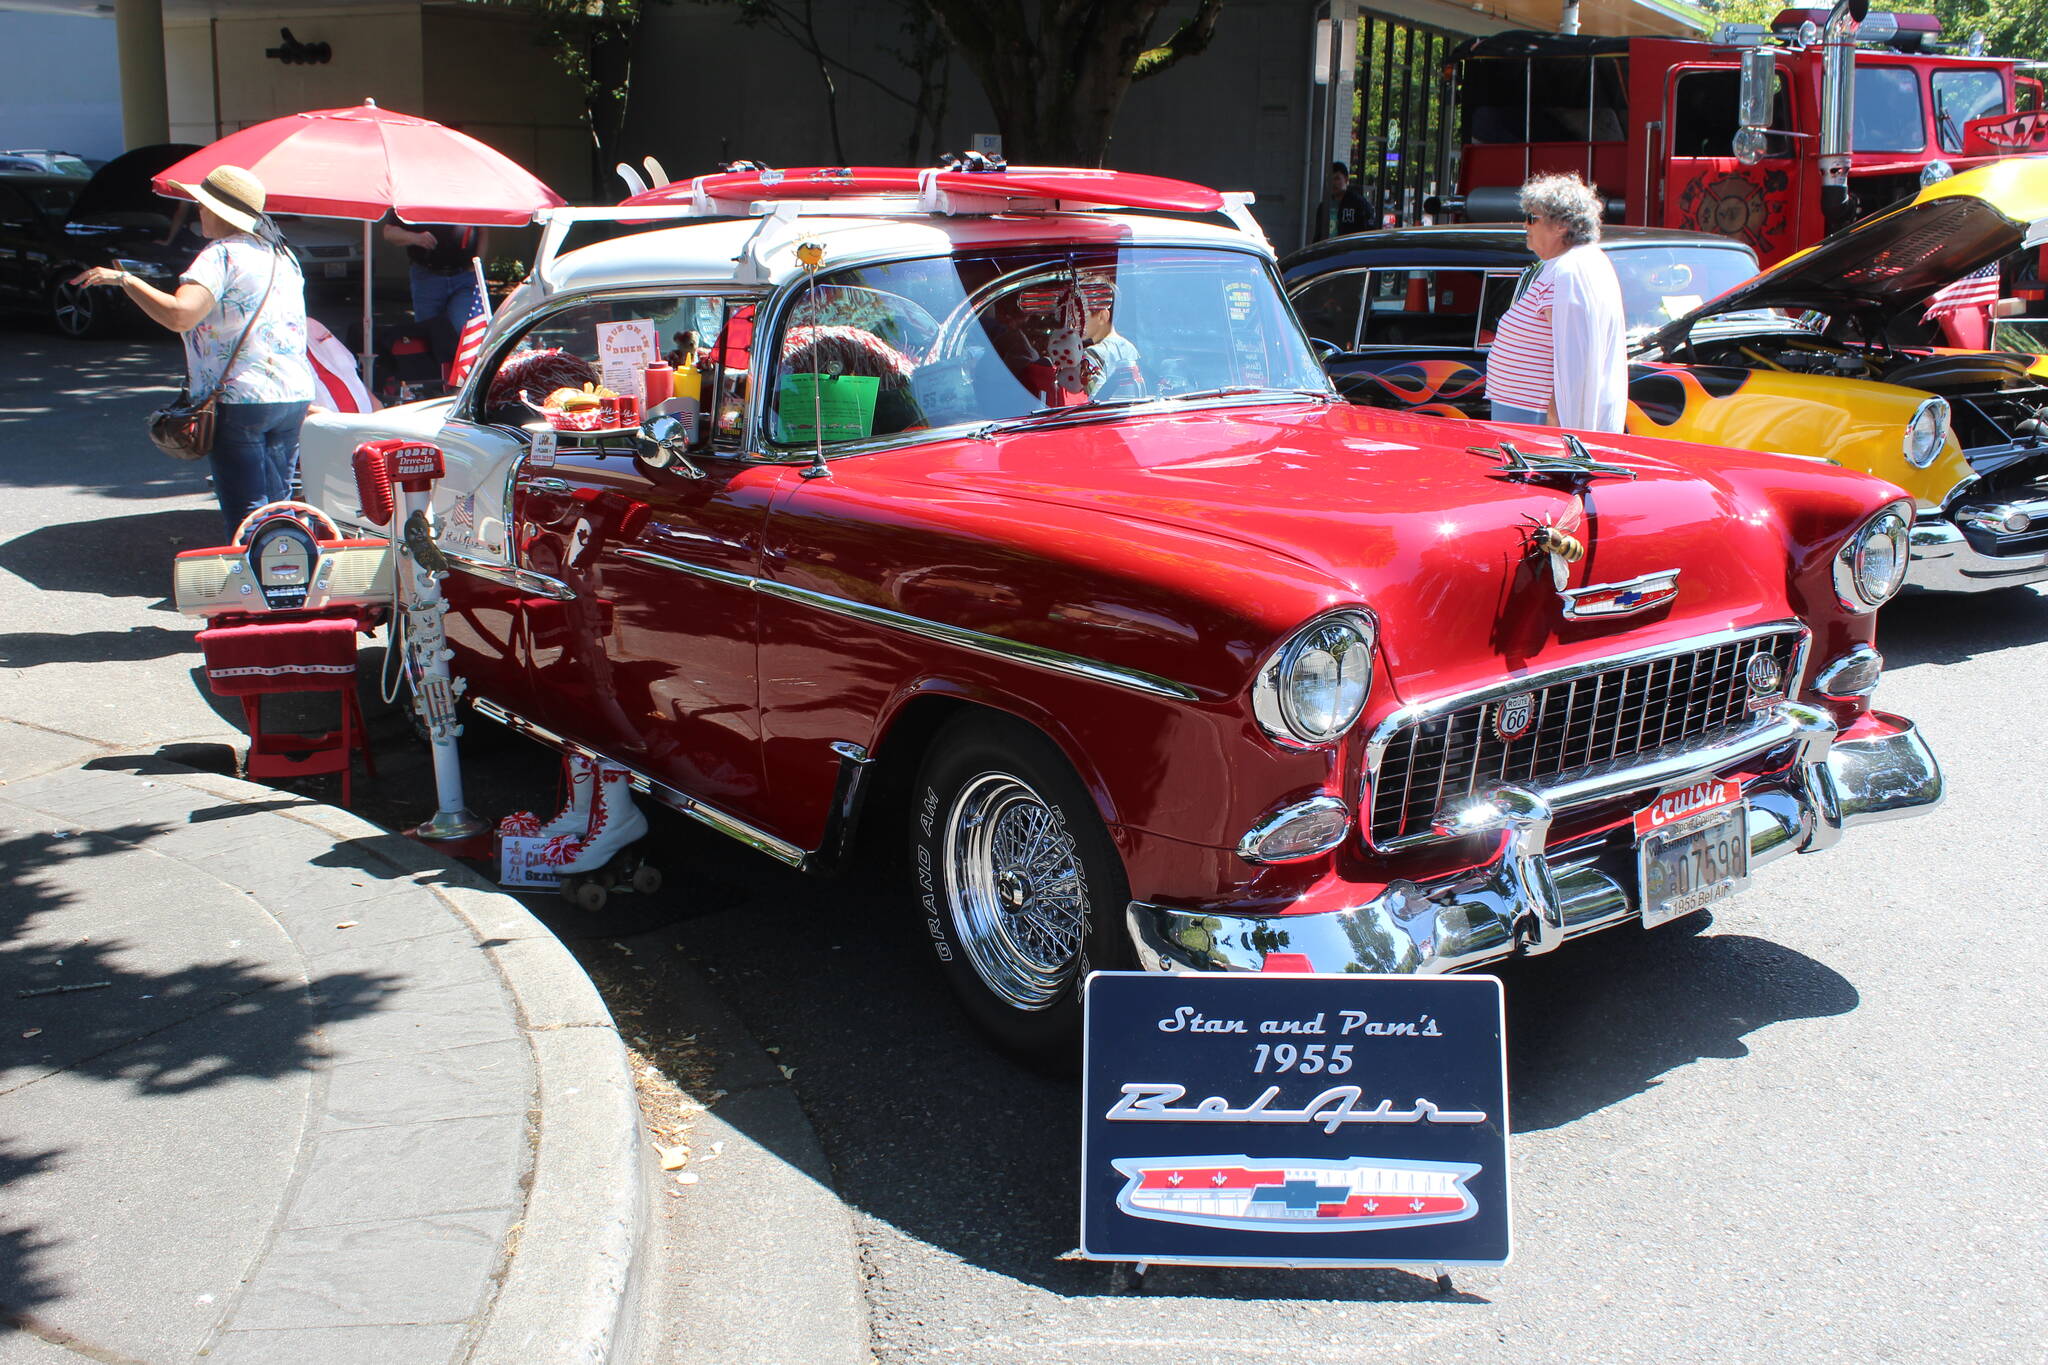 Return to Renton Car Show at Renton Pavilion Even is back for its 32nd year July 7. Photo by Bailey Jo Josie/Alb Media